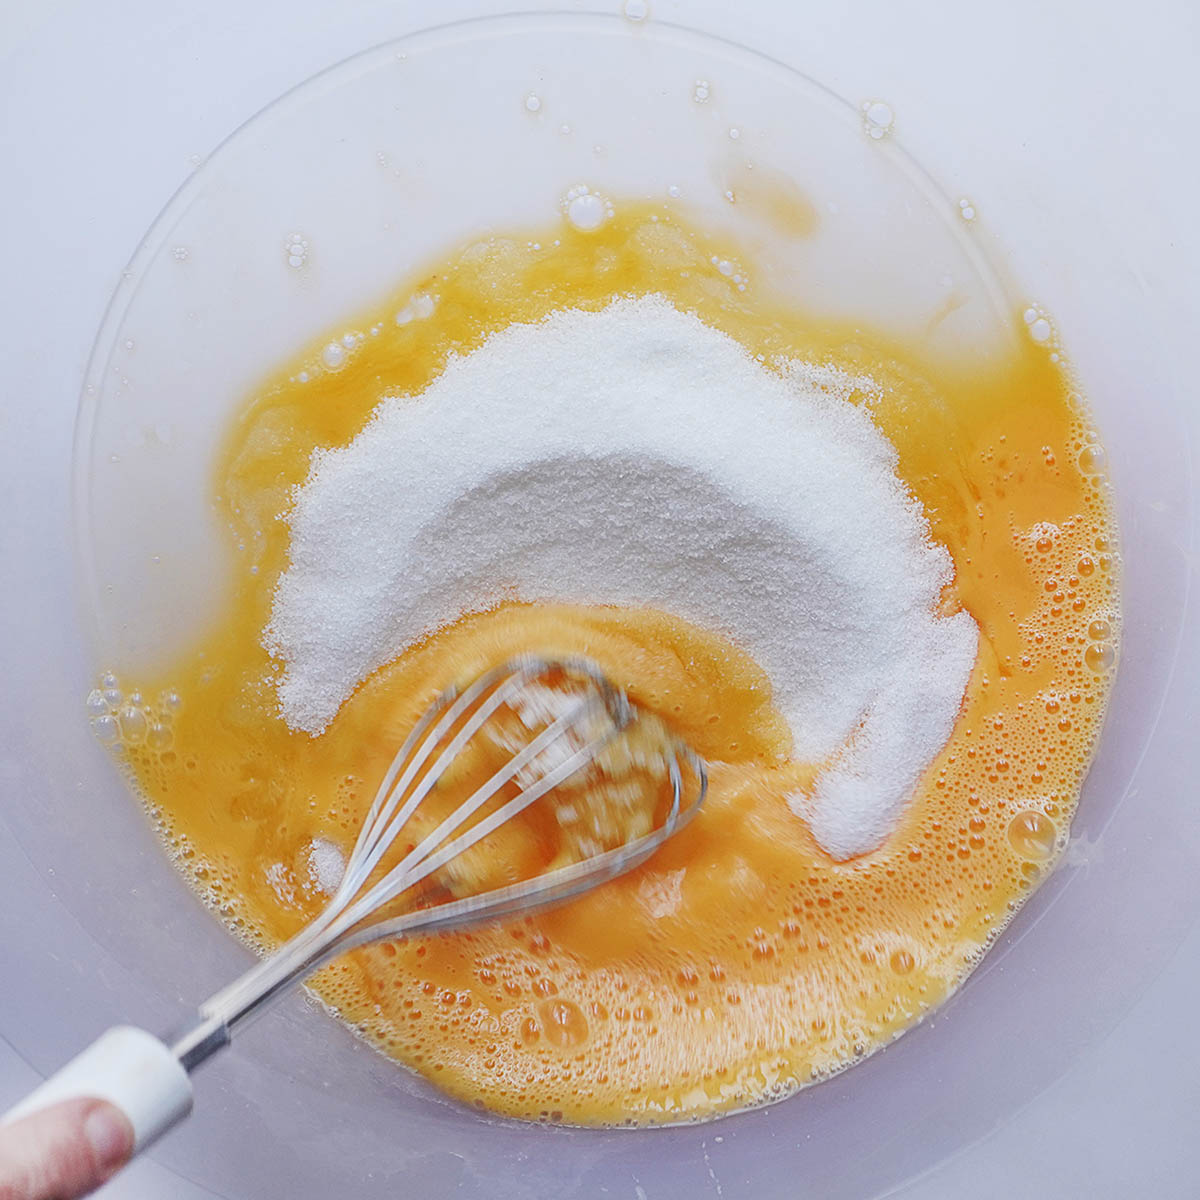 Whipping eggs and sugar with a whisk in a large bowl.